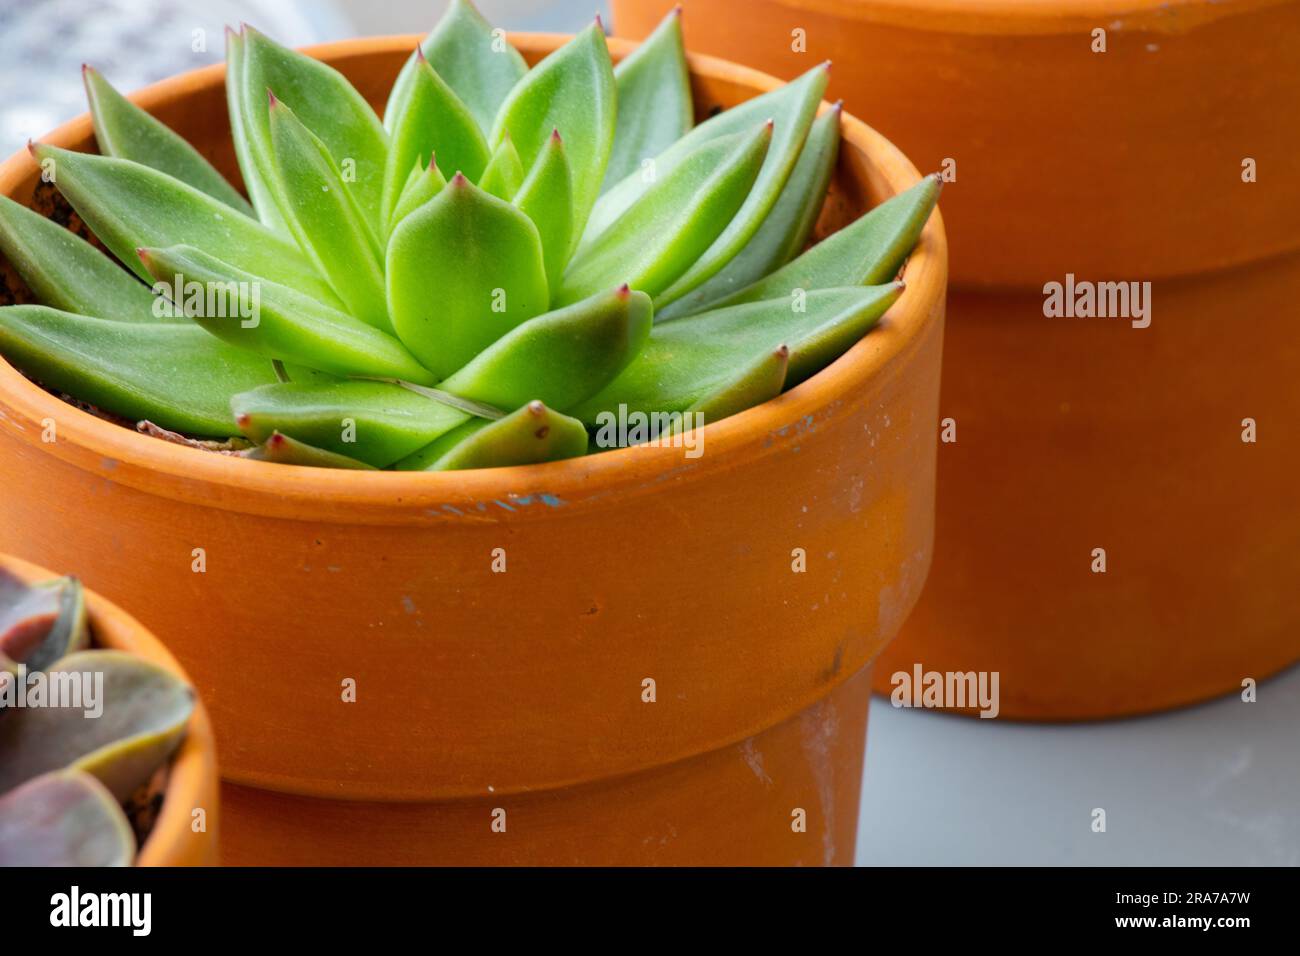 indoor flower cacti in a pot clay pot on a light background Stock Photo